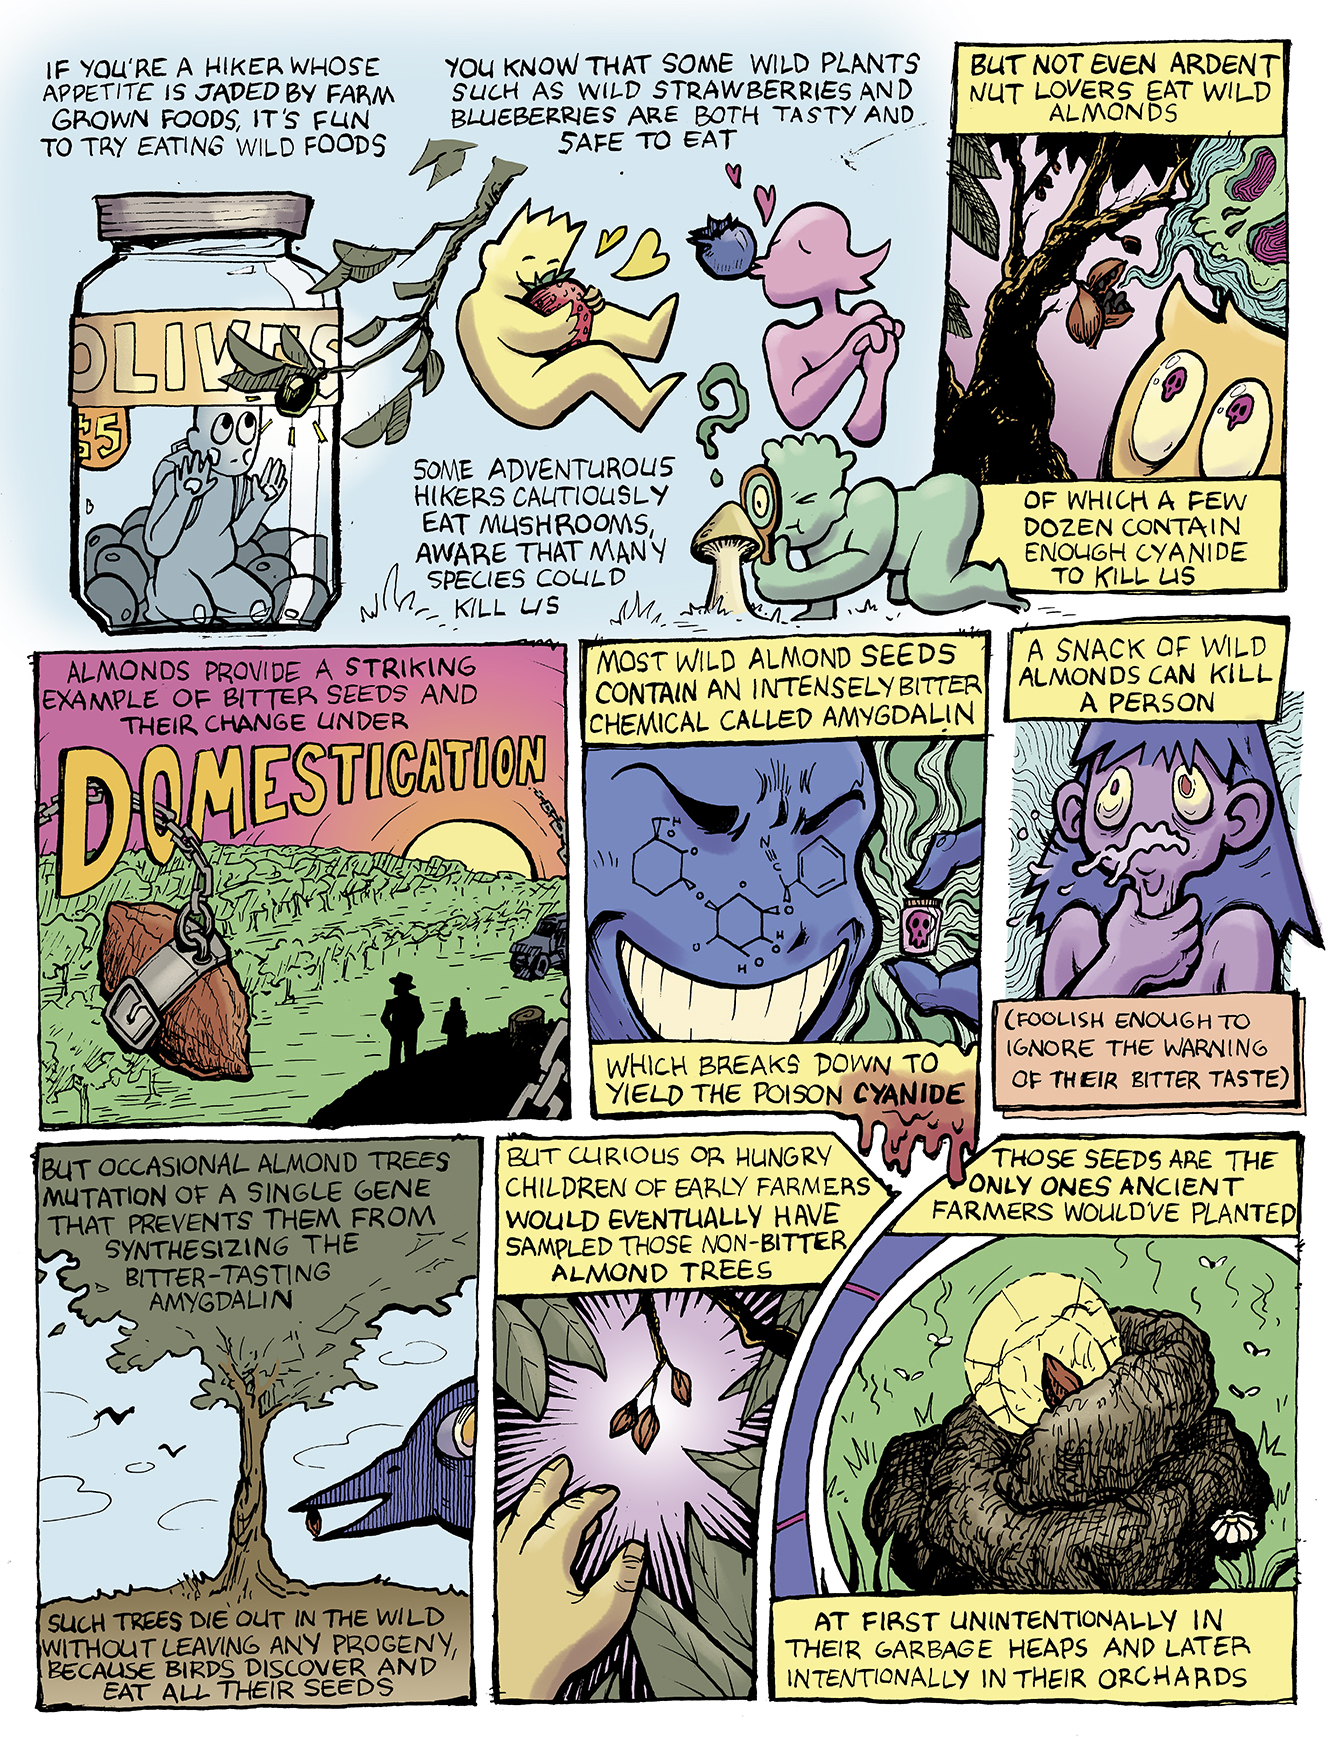 An illustrated excerpt from chapter 7 of the book Guns, Germs, and Steel: The Fates of Human Societies by Jared Diamond, which explains how almond trees came to be domesticated. The illustrations are done in a colorful, cartoony style.